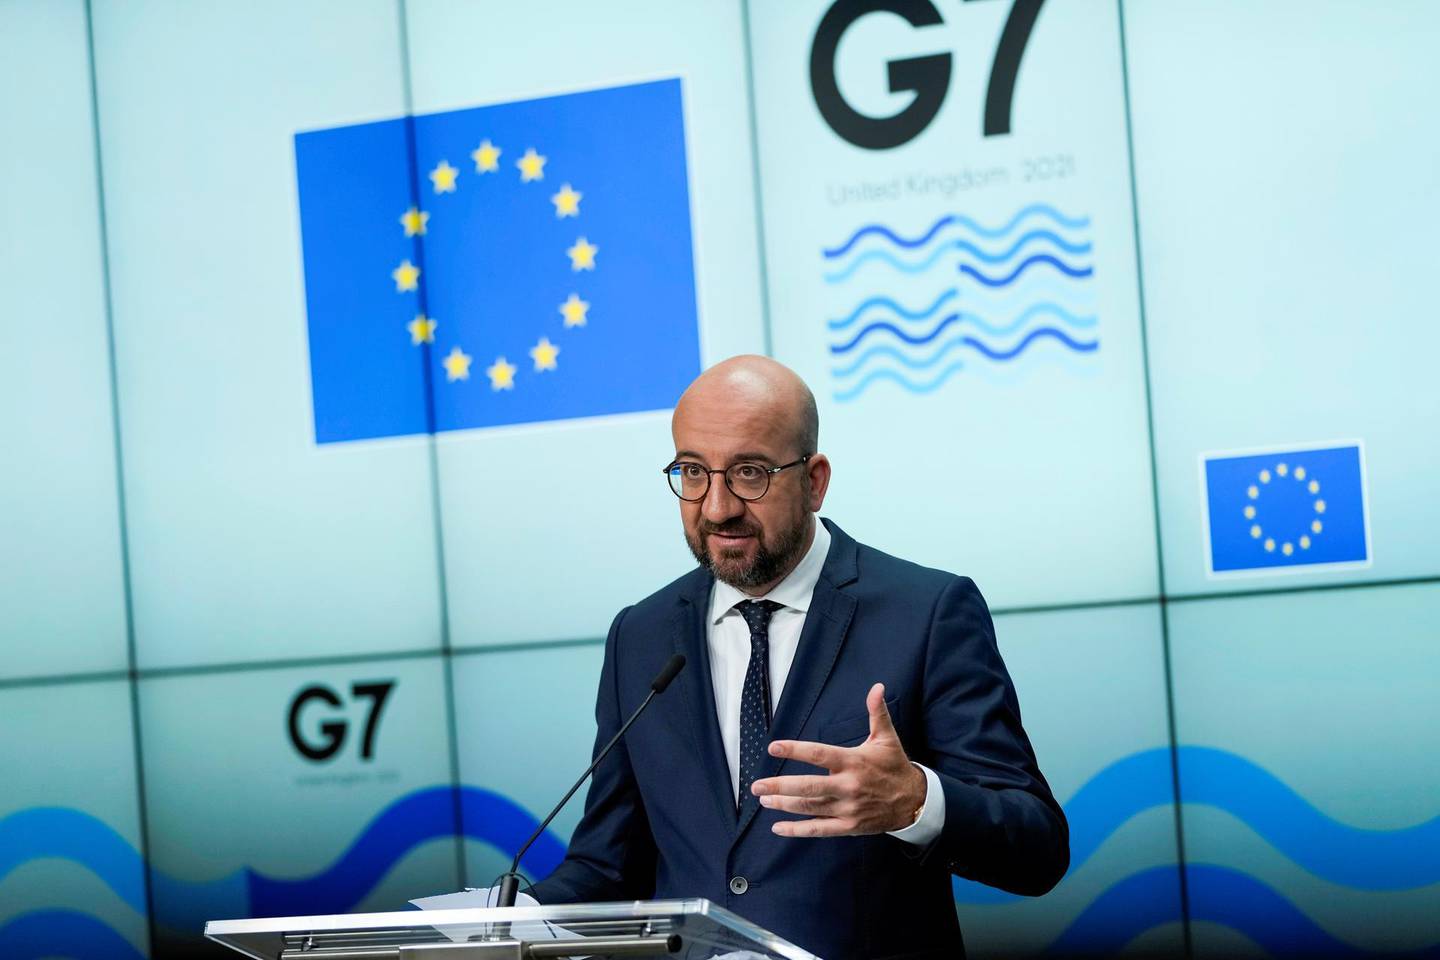 European Council President Charles Michel speaks during a joint news conference with  European Commission President Ursula von der Leyen ahead of the G7 summit, at the EU headquarters in Brussels, Belgium June 10, 2021. Francisco Seco/Pool via REUTERS